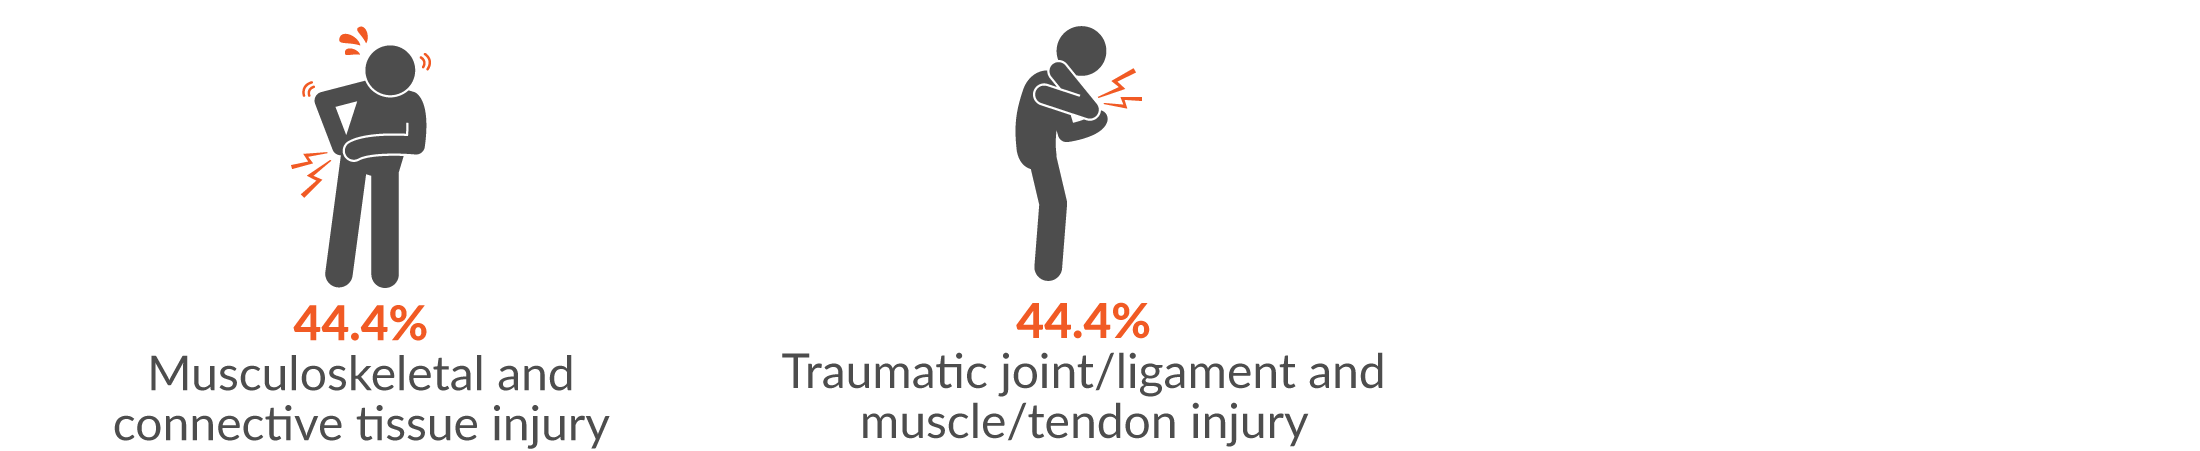 44.4% musculoskeletal and connective tissue injury; and 44.4% traumatic joint/ligament and muscle/tendon injury.